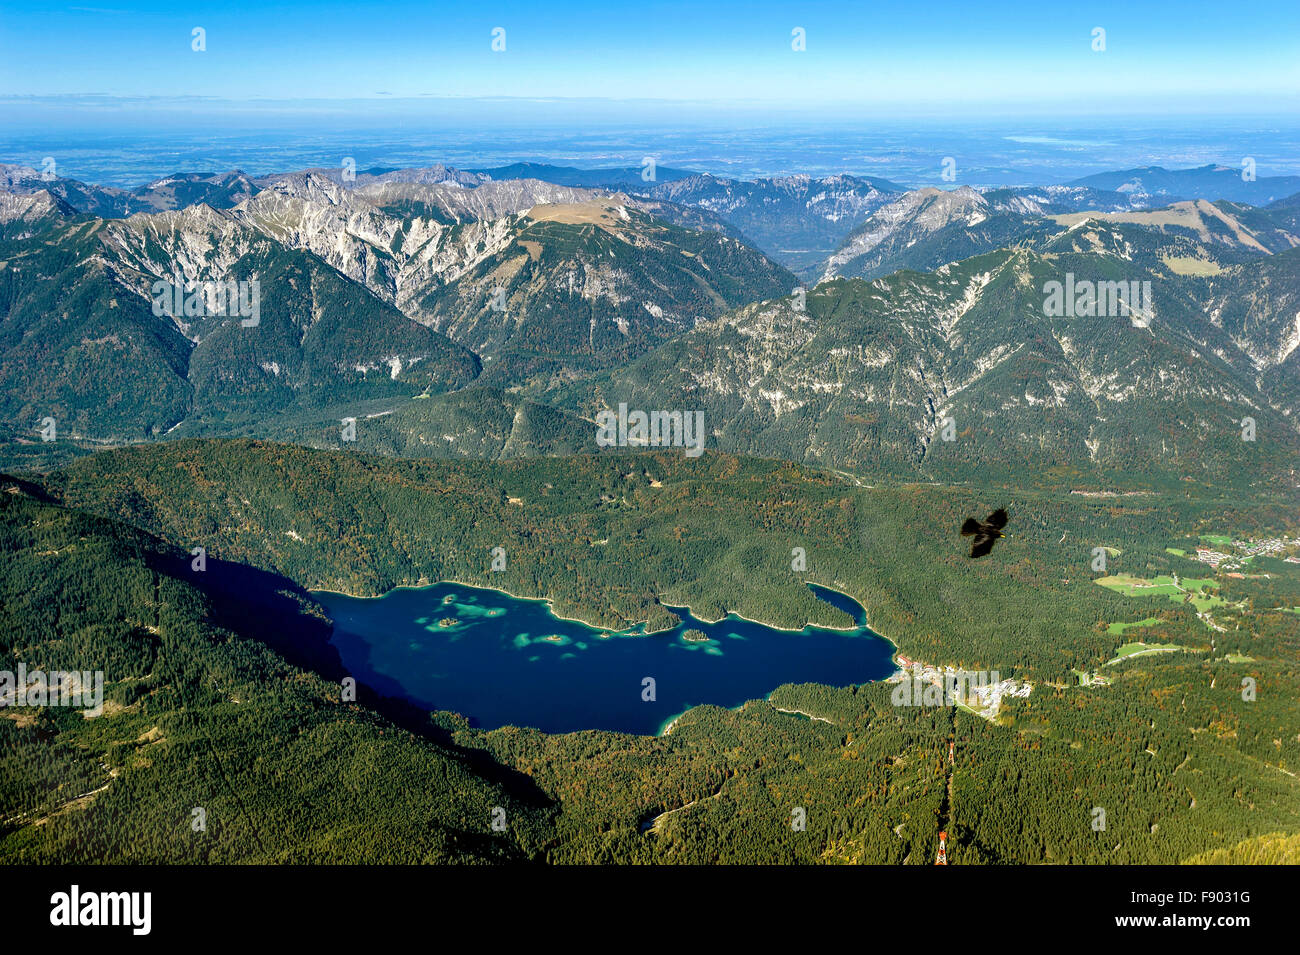 View of Eibsee Lake and Ammergau Alps from Zugspitze, Grainau, Werdenfelser Land, Alps, Upper Bavaria, Bavaria, Germany Stock Photo